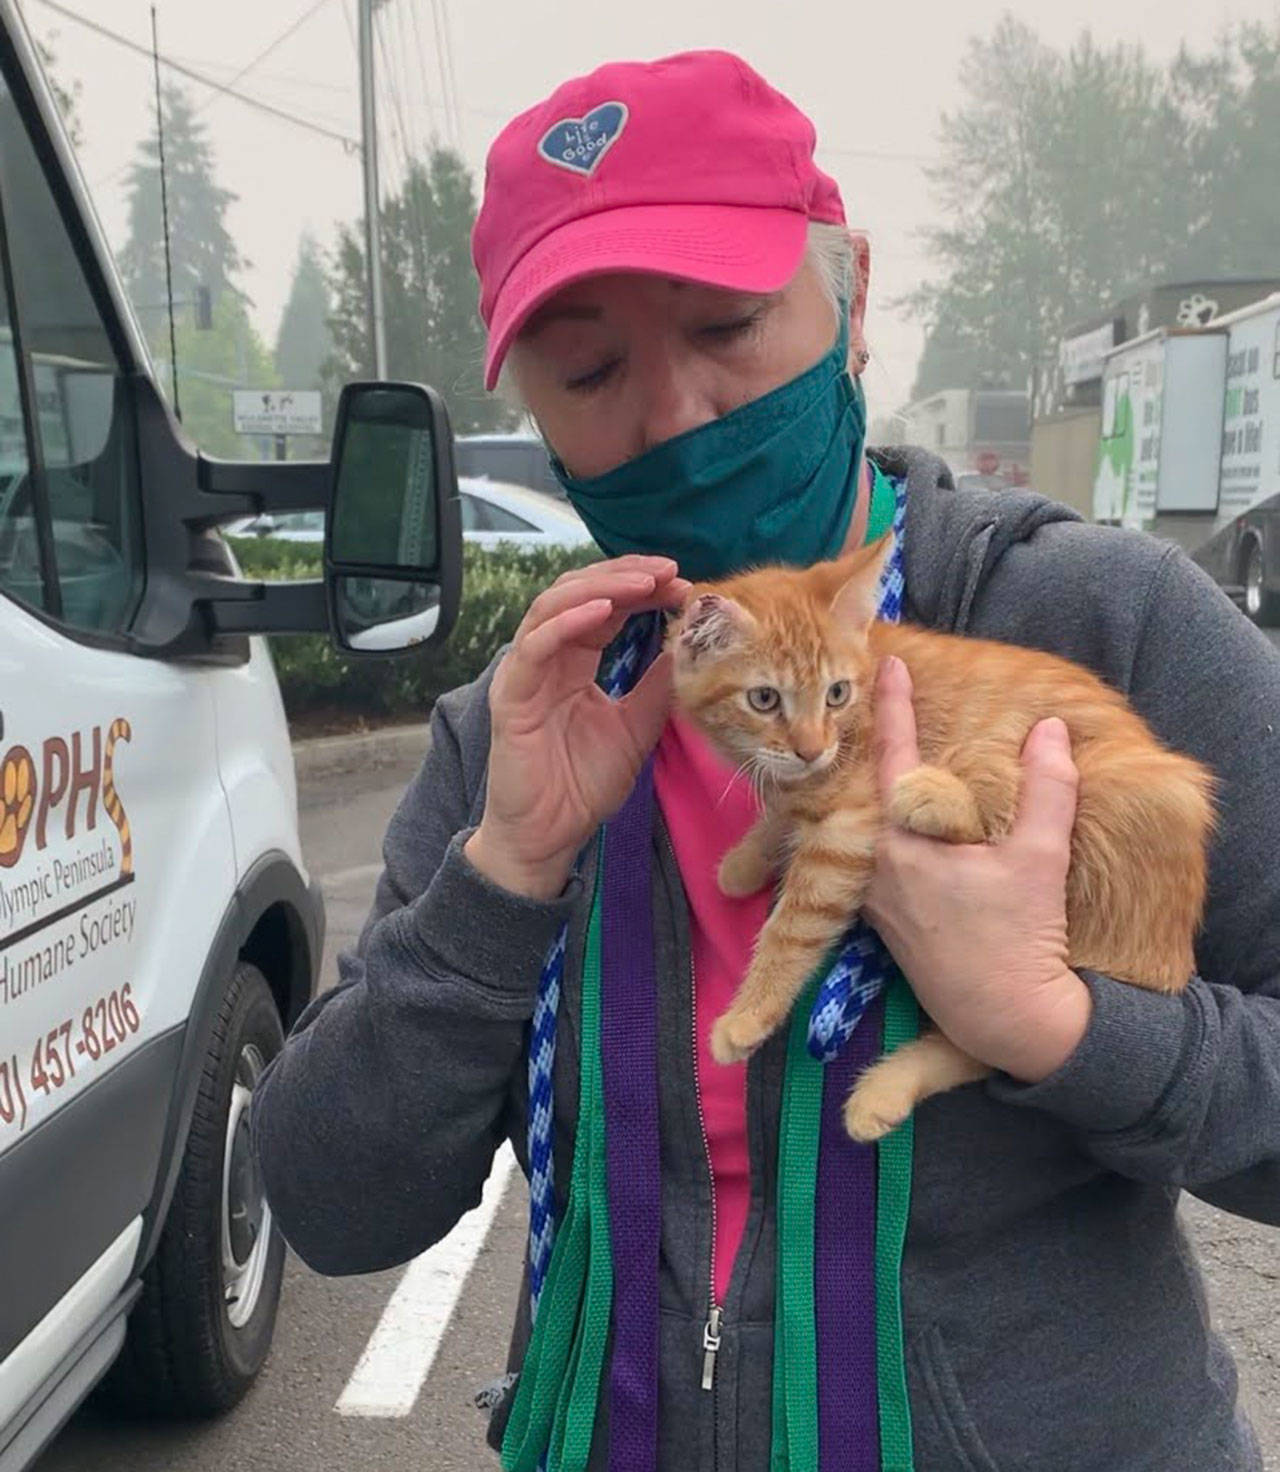 Jacquelene (pictured) and Brooks Peterson retrieve dogs and cats from Start Rescue’s drop-off area in Portland, Ore. (Photo courtesy of Olympic Peninsula Humane Society)